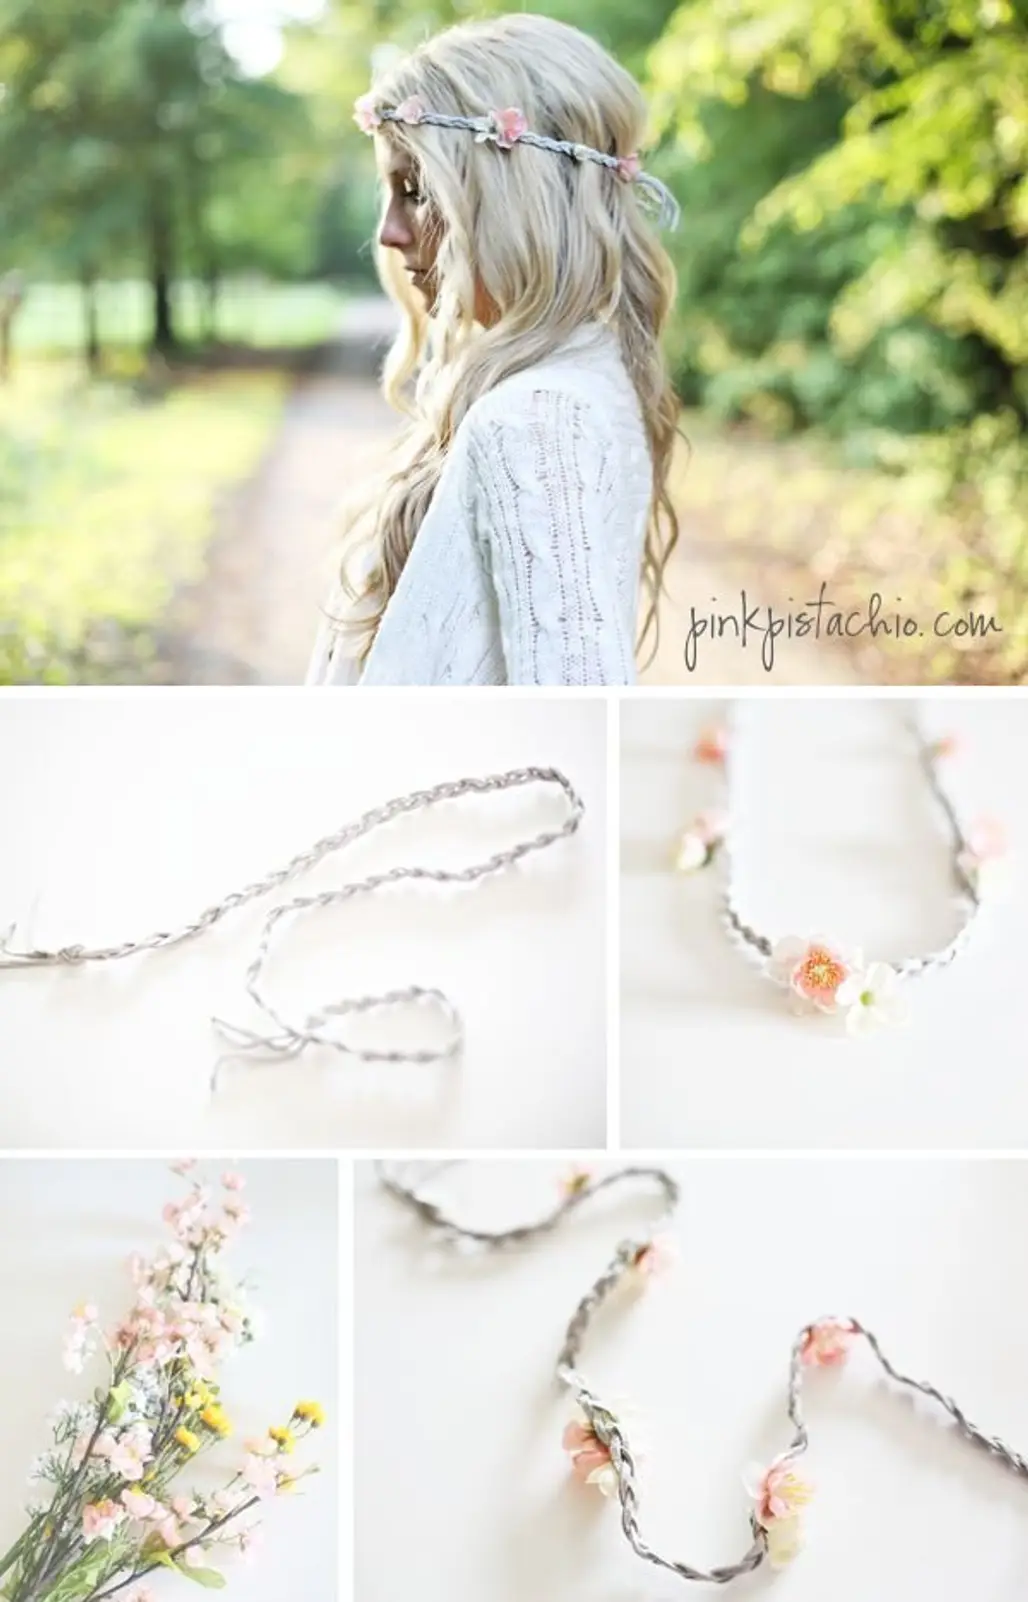 This Simple Headband is Great for Weddings or Picnics